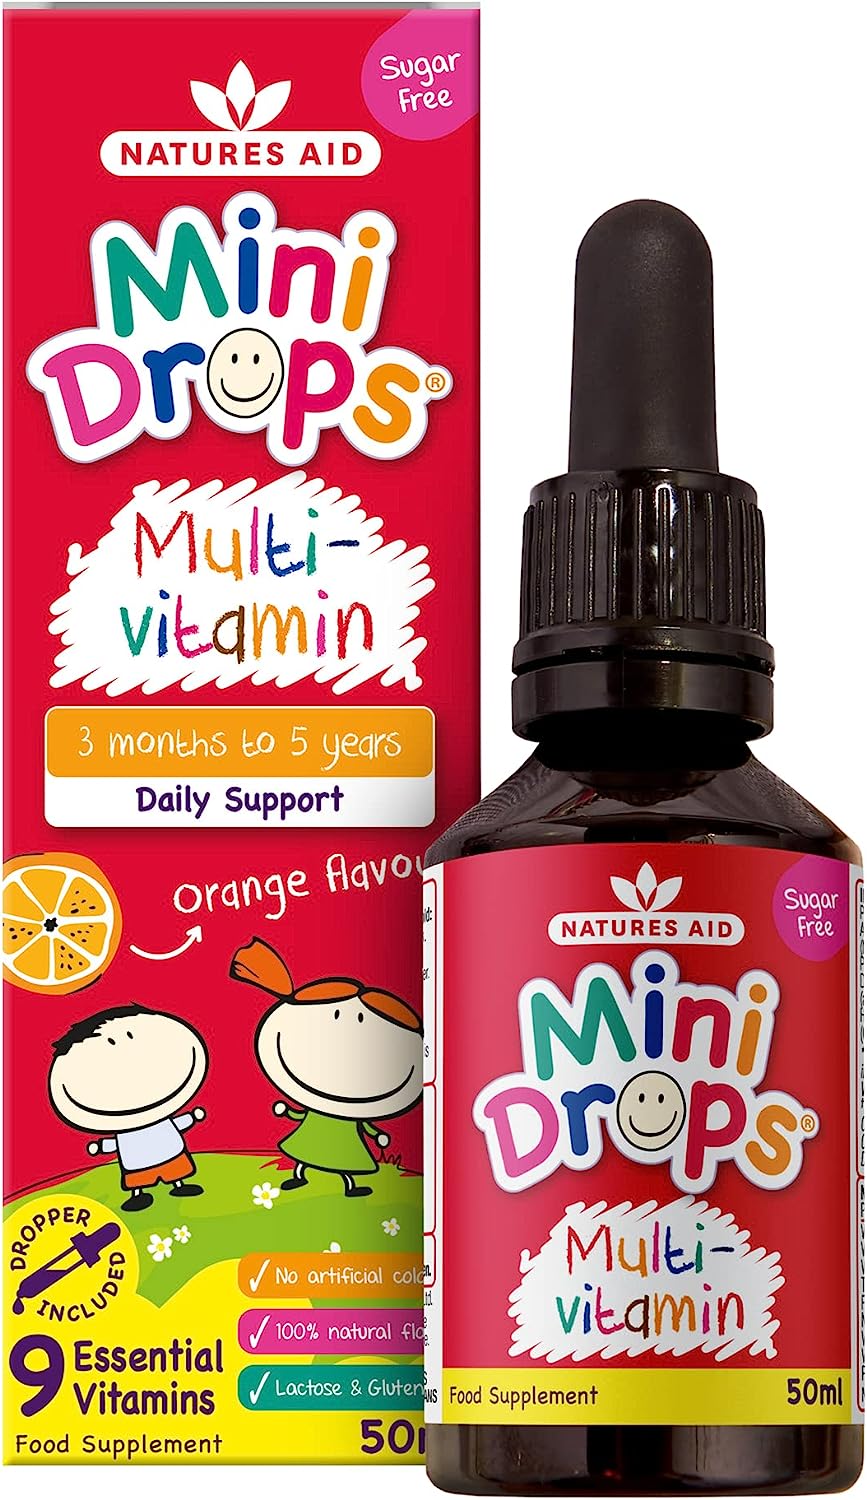 Natures Aid Mini Drops Multi-vitamin Orange Flavour for Infants and Children Sugar Free 50ml RRP £8 CLEARANCE XL £6.99